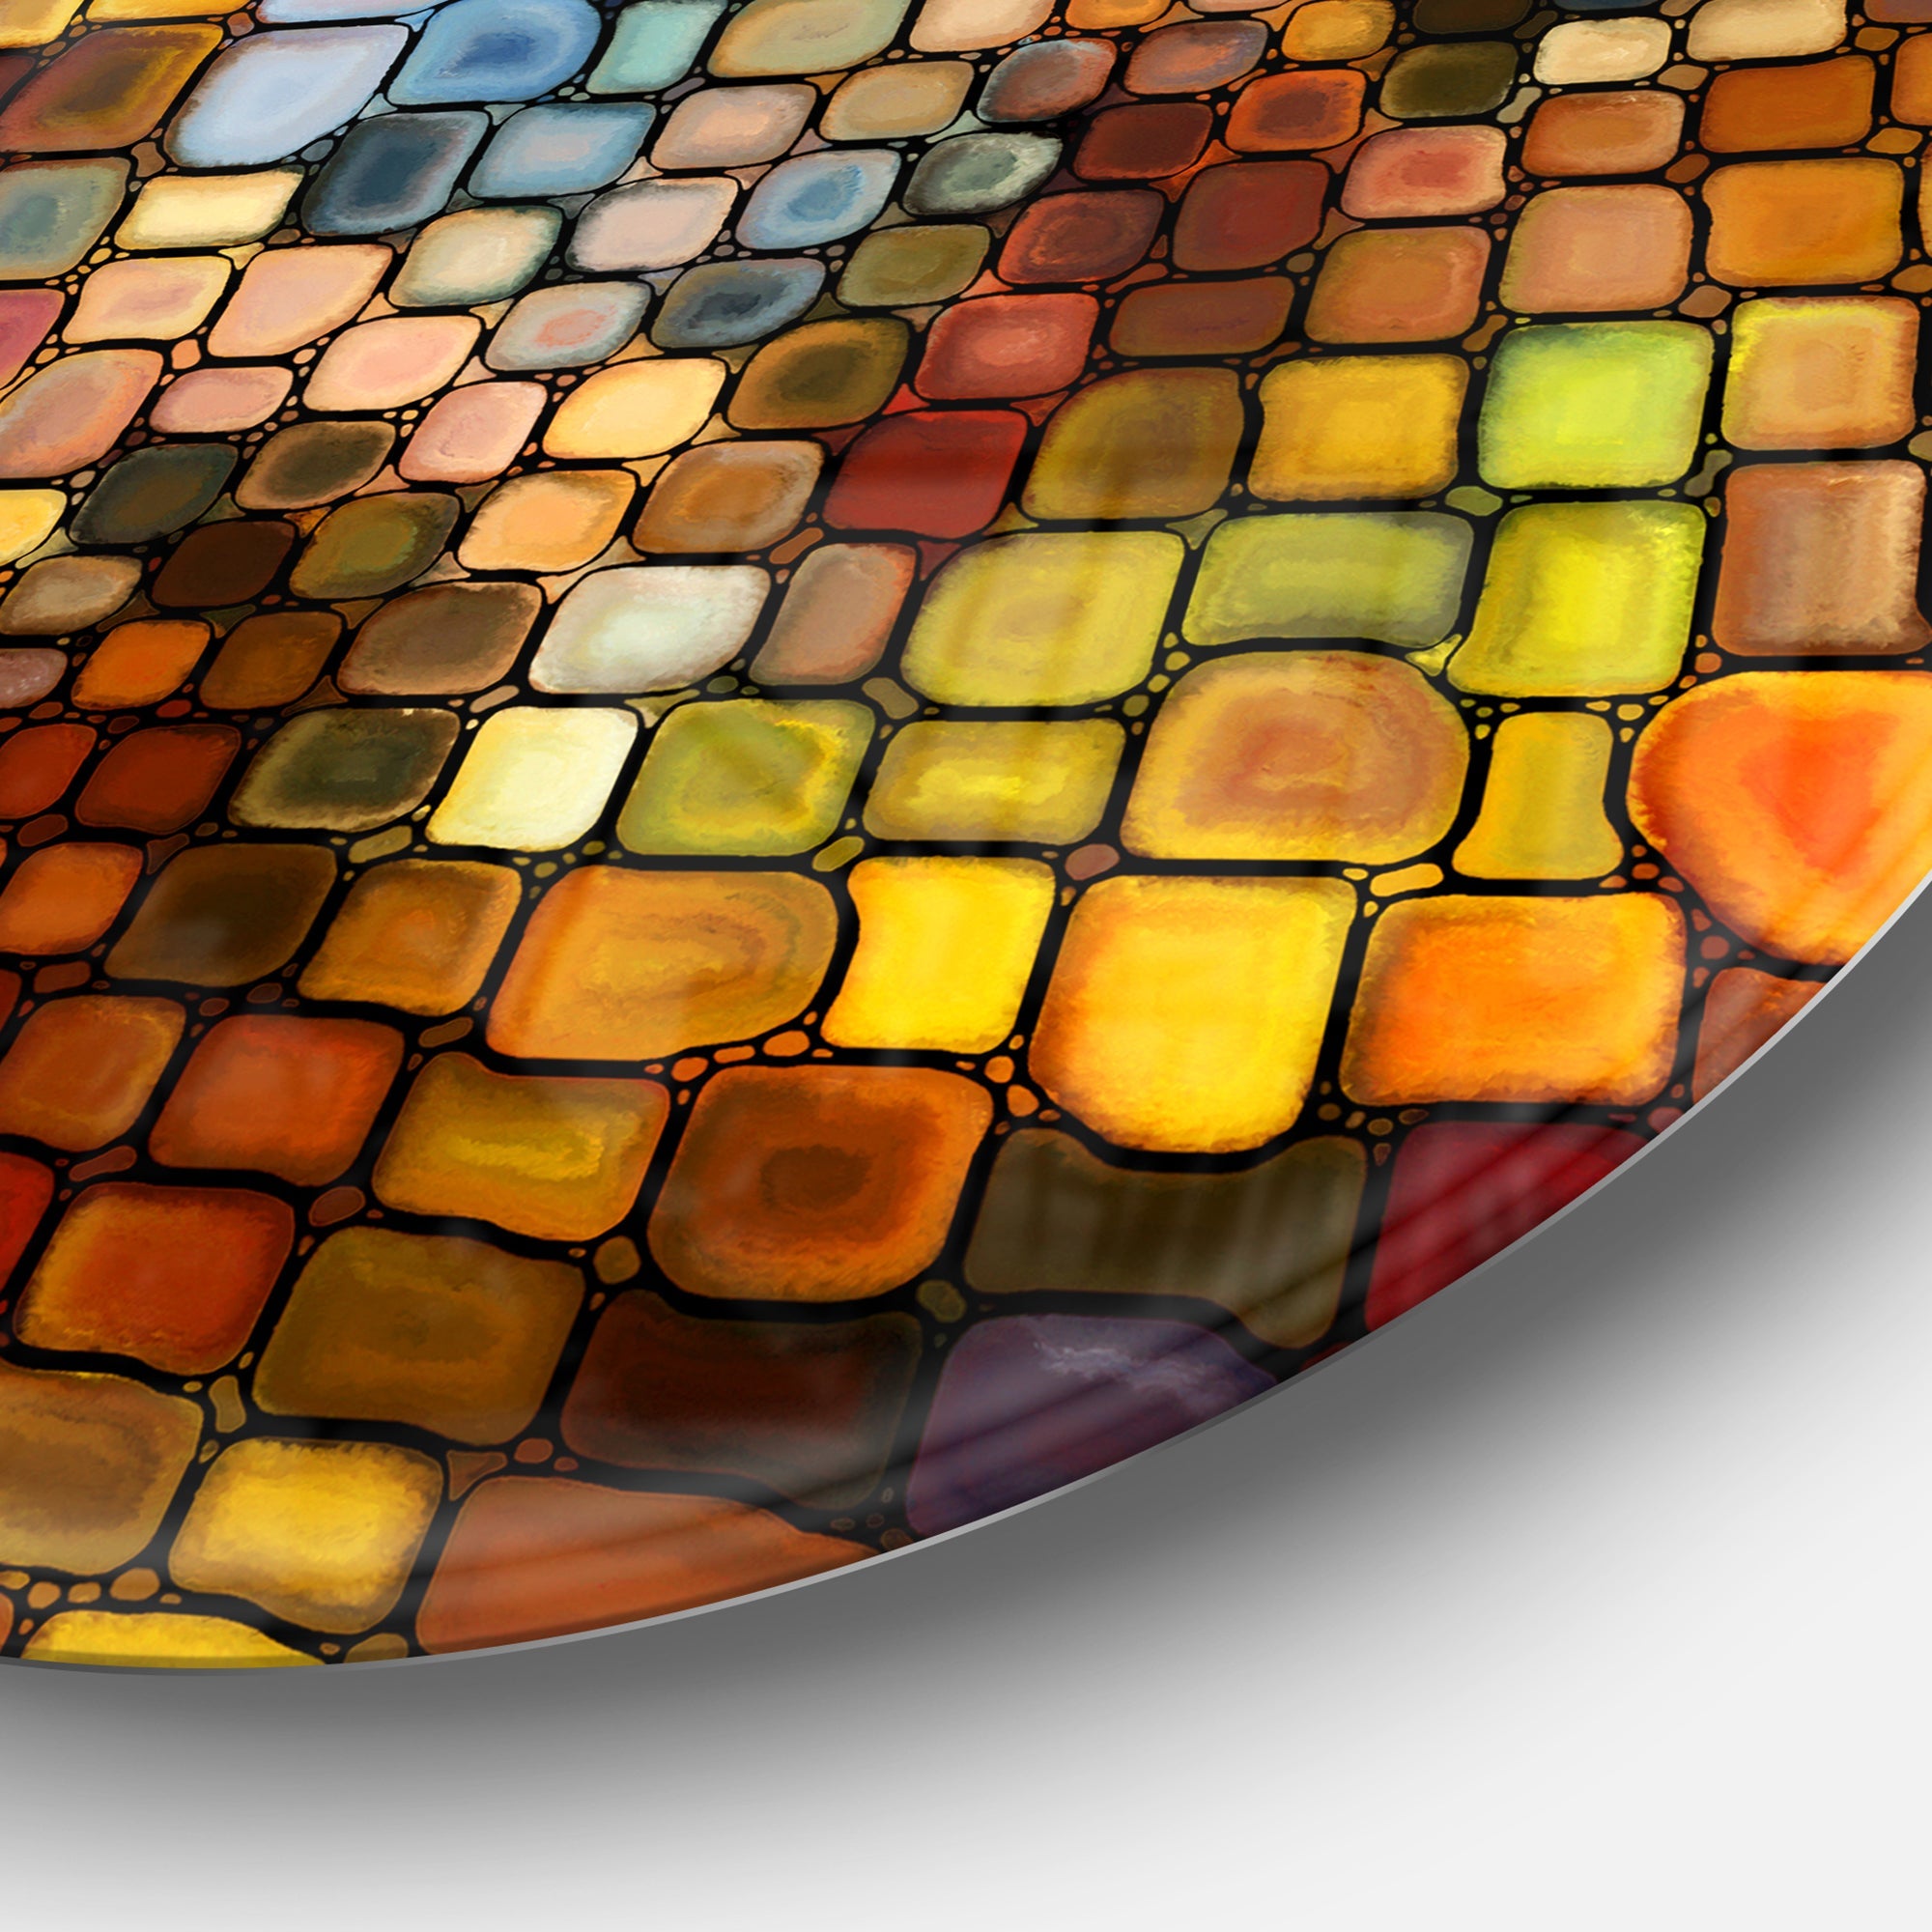 Dreaming of Stained Glass Abstract Metal Artwork